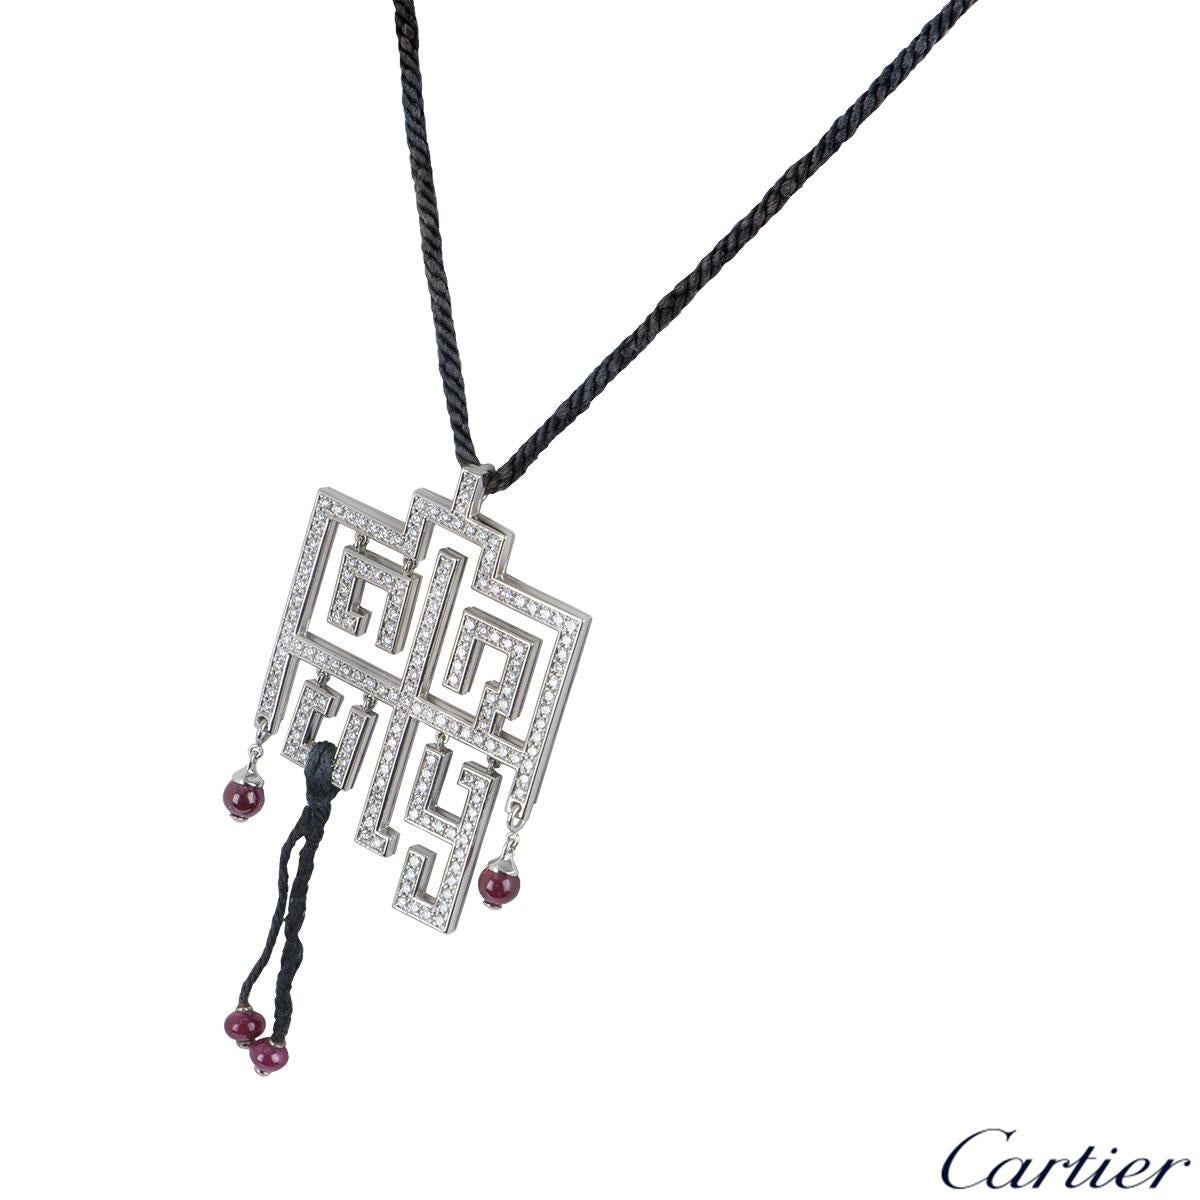 A stylish 18k white gold pendant by Cartier from the Le Baiser Du Dragon collection. The pendant features a pave diamond set openwork oriental plaque, set with 169 round brilliant cut diamonds totalling approximately 2.41ct. The plaque suspends 4